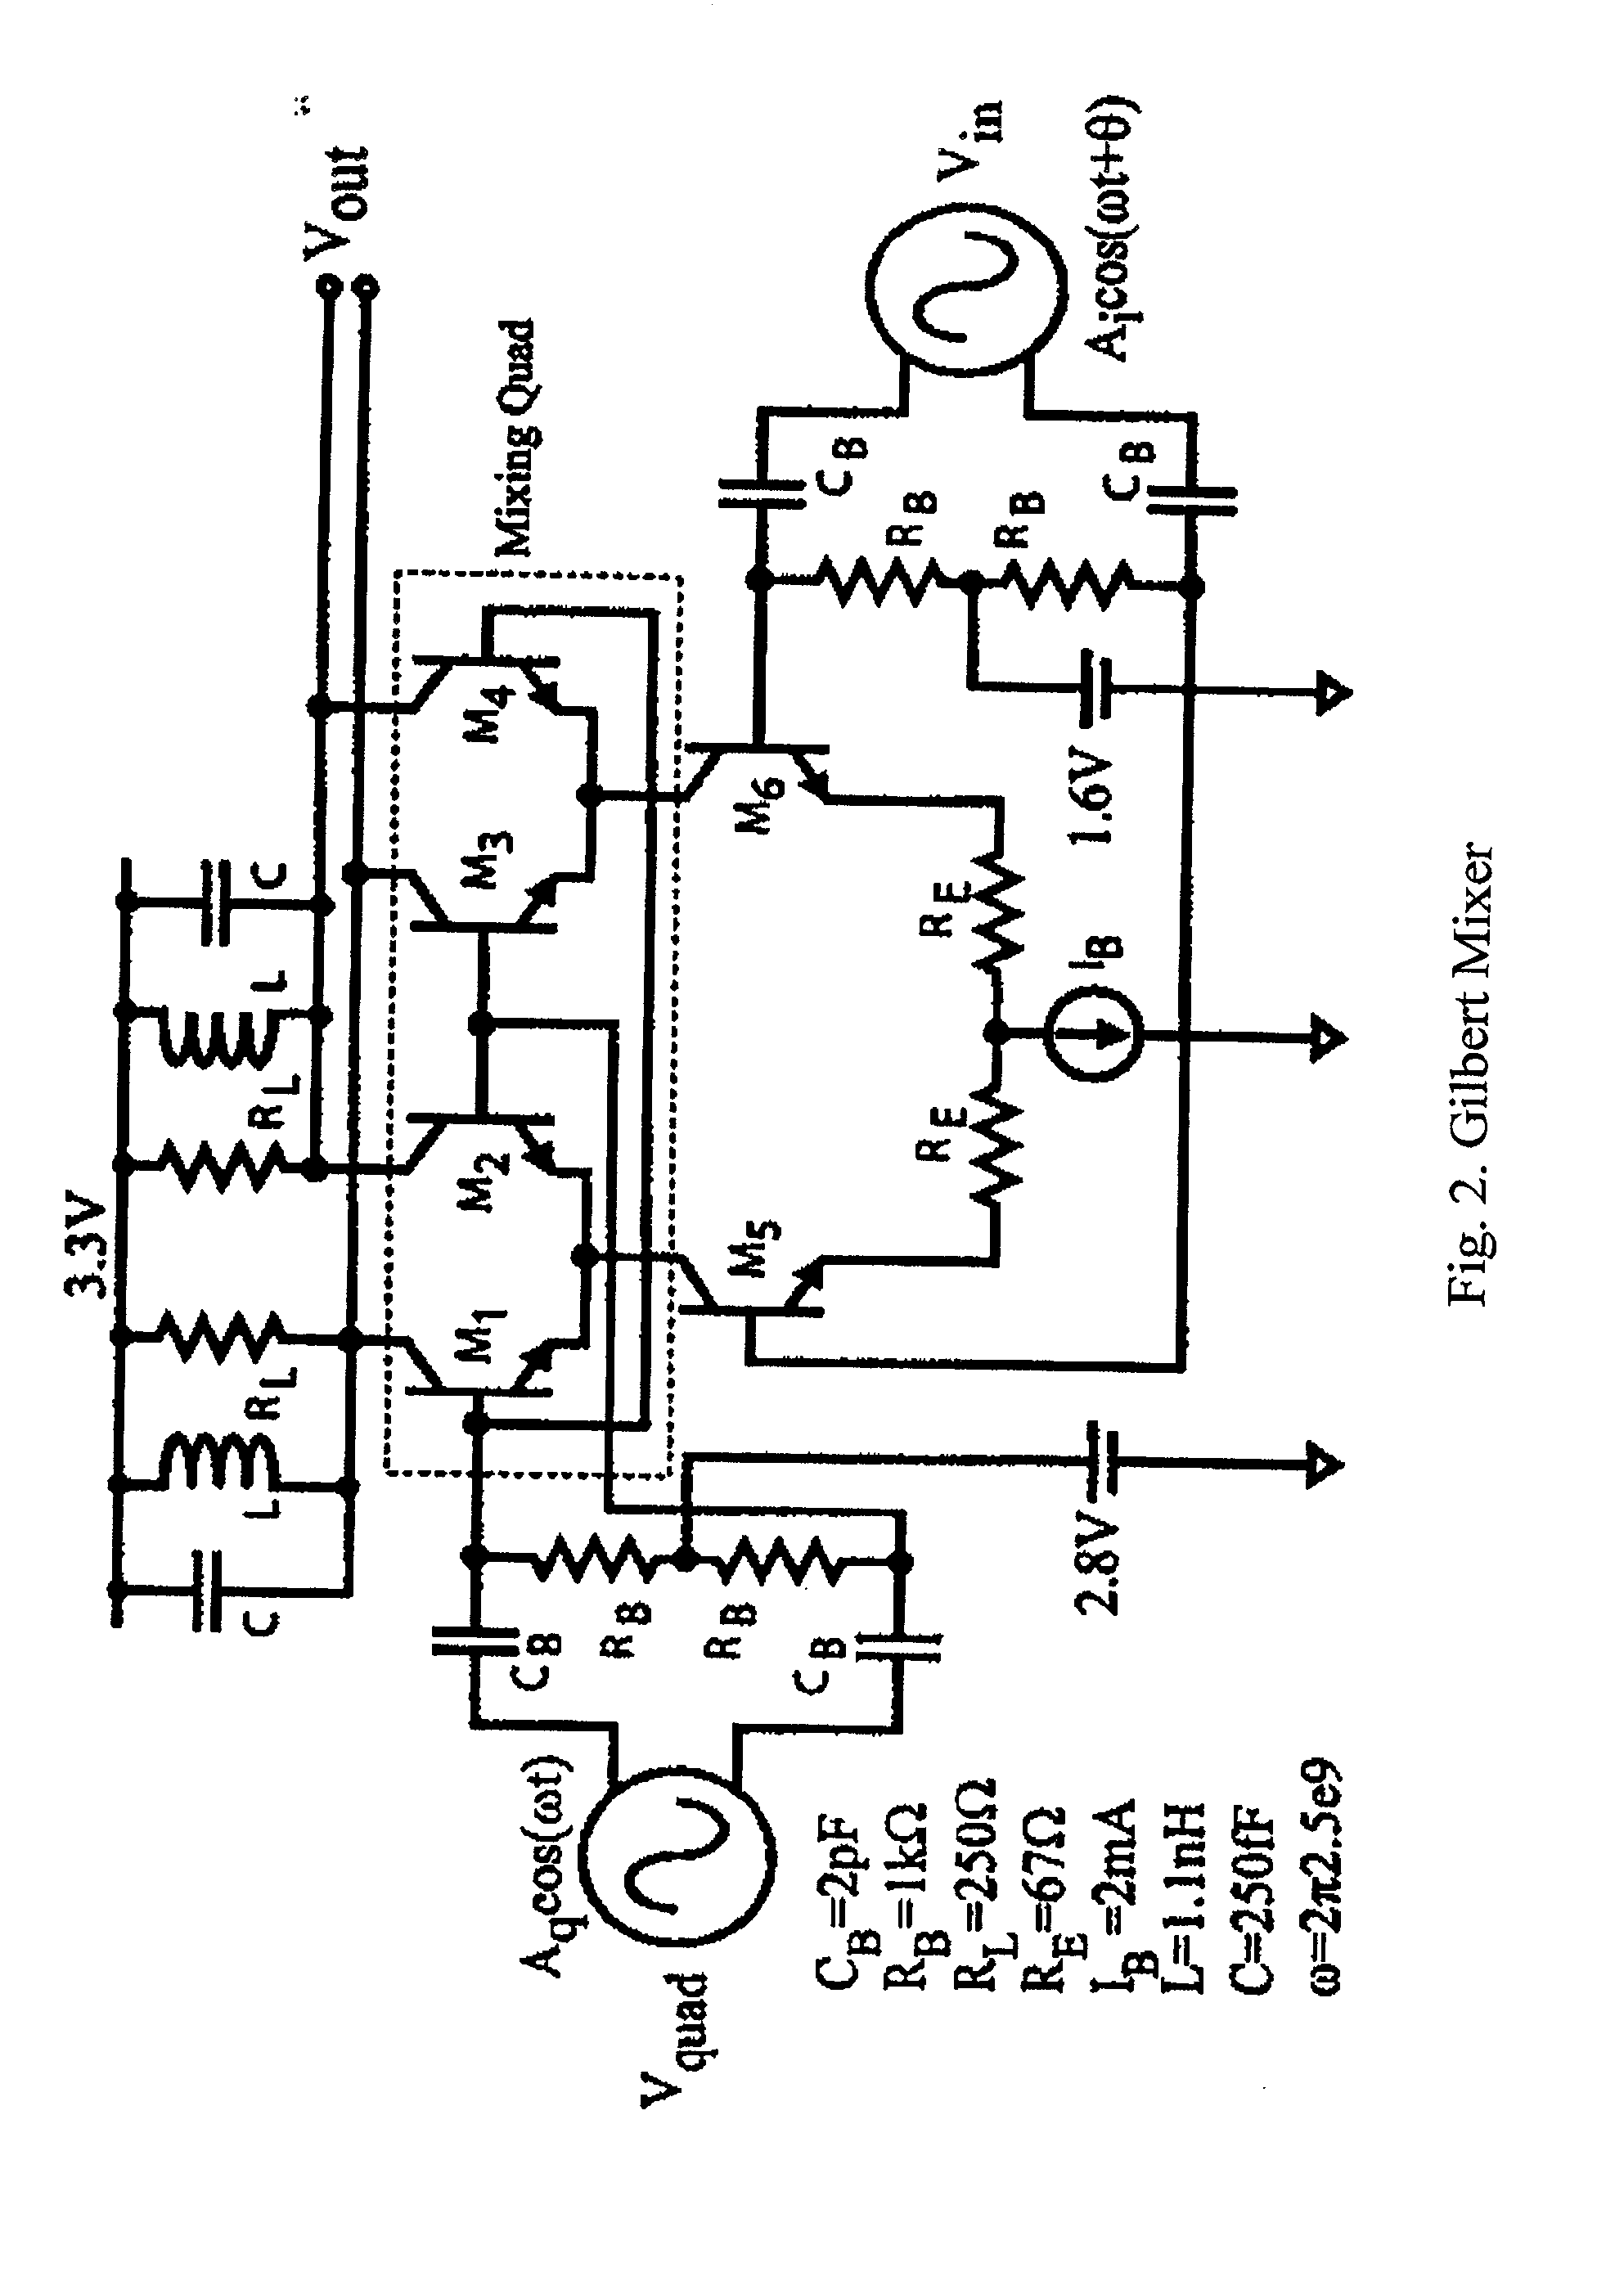 Quadrature frequency doubler with adjustable phase offset